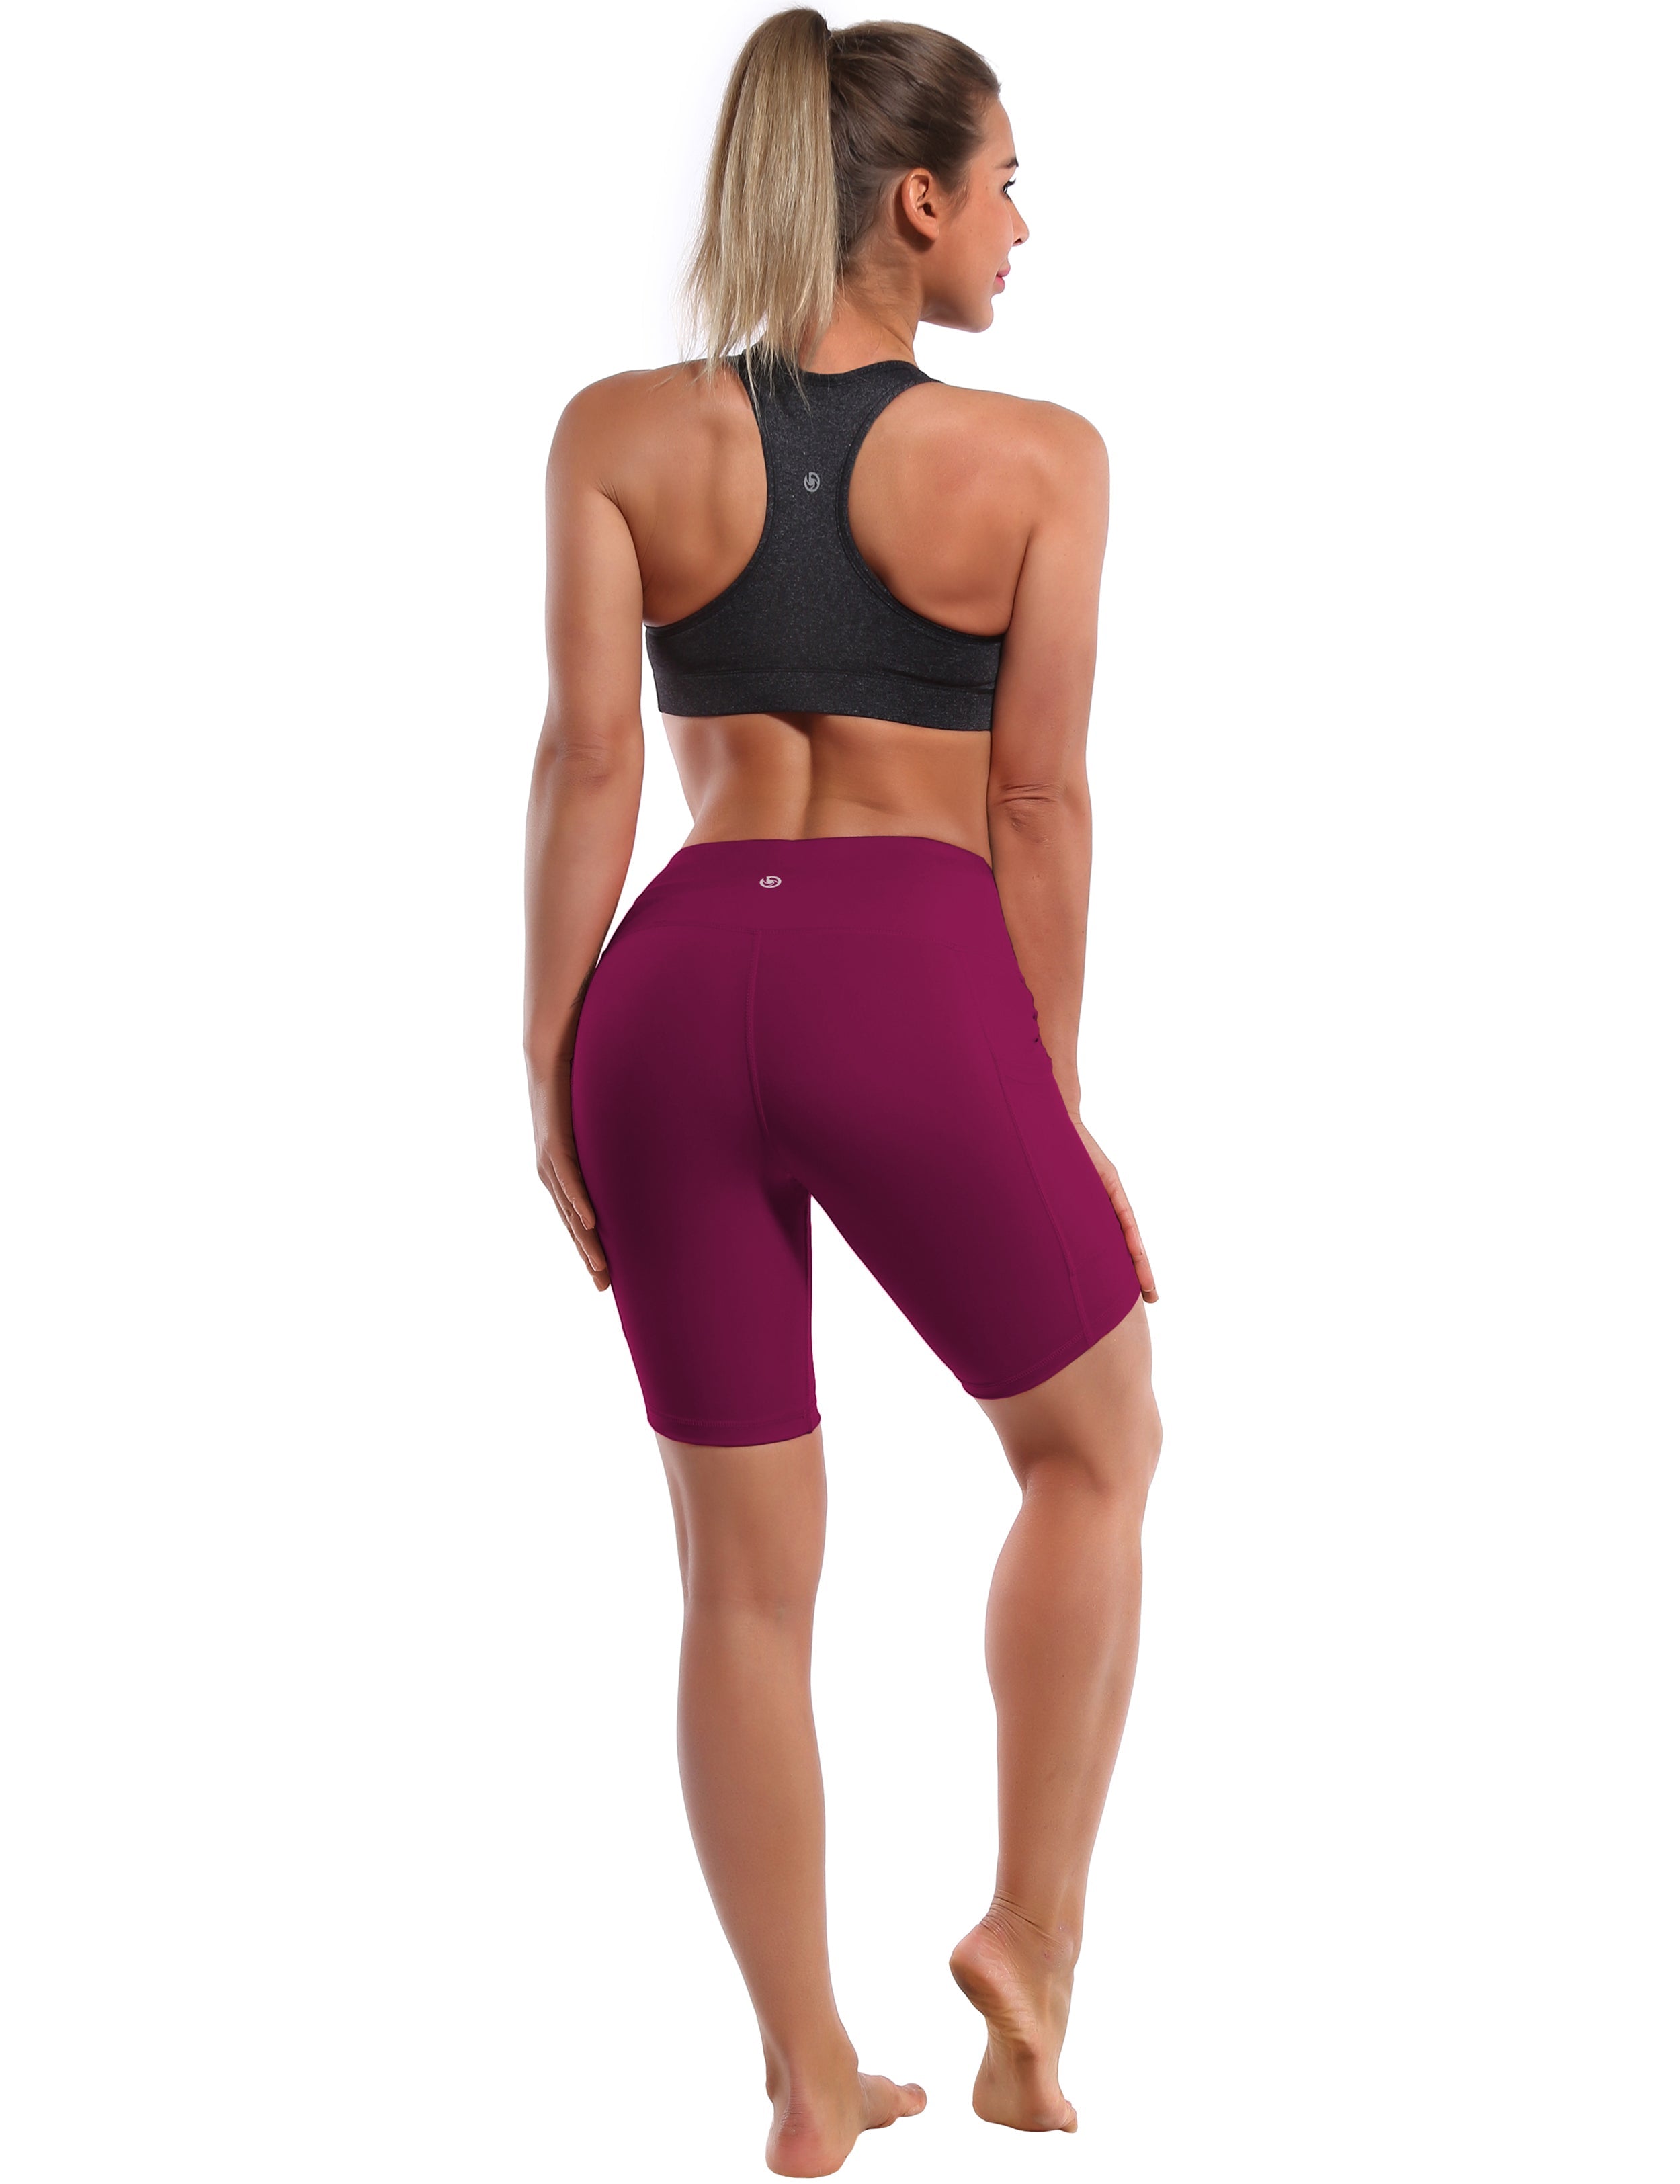 8" Side Pockets Biking Shorts grapevine Sleek, soft, smooth and totally comfortable: our newest style is here. Softest-ever fabric High elasticity High density 4-way stretch Fabric doesn't attract lint easily No see-through Moisture-wicking Machine wash 75% Nylon, 25% Spandex